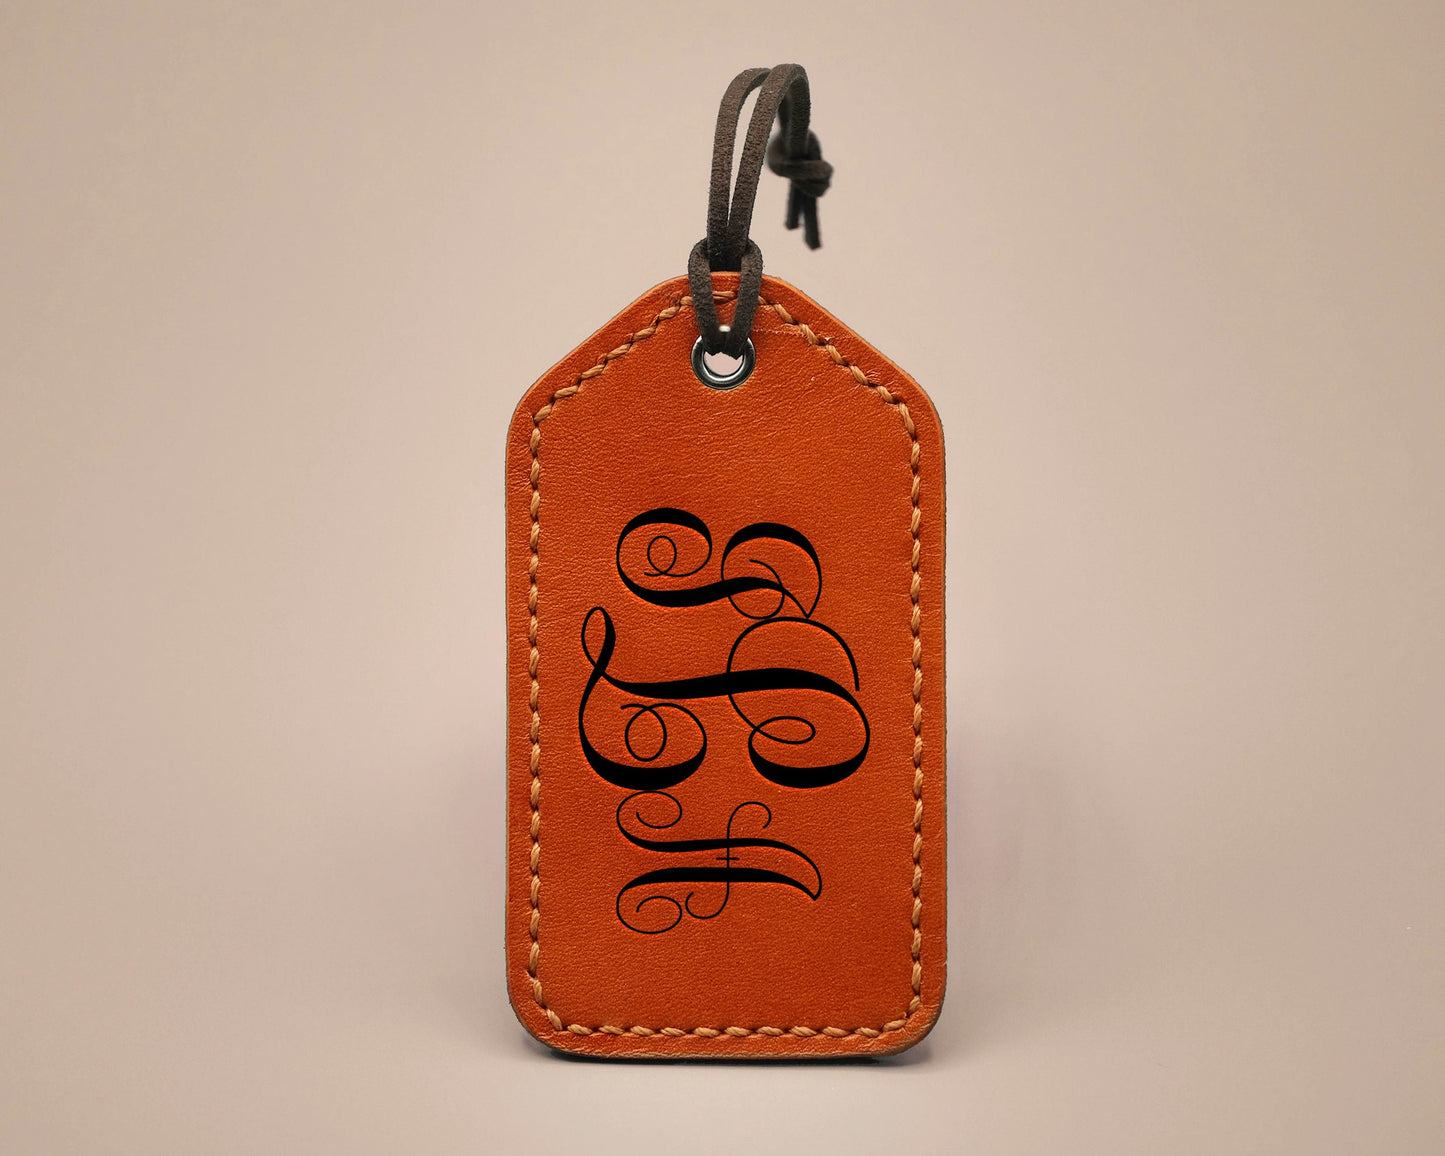 Leather Luggage Tag - Initials